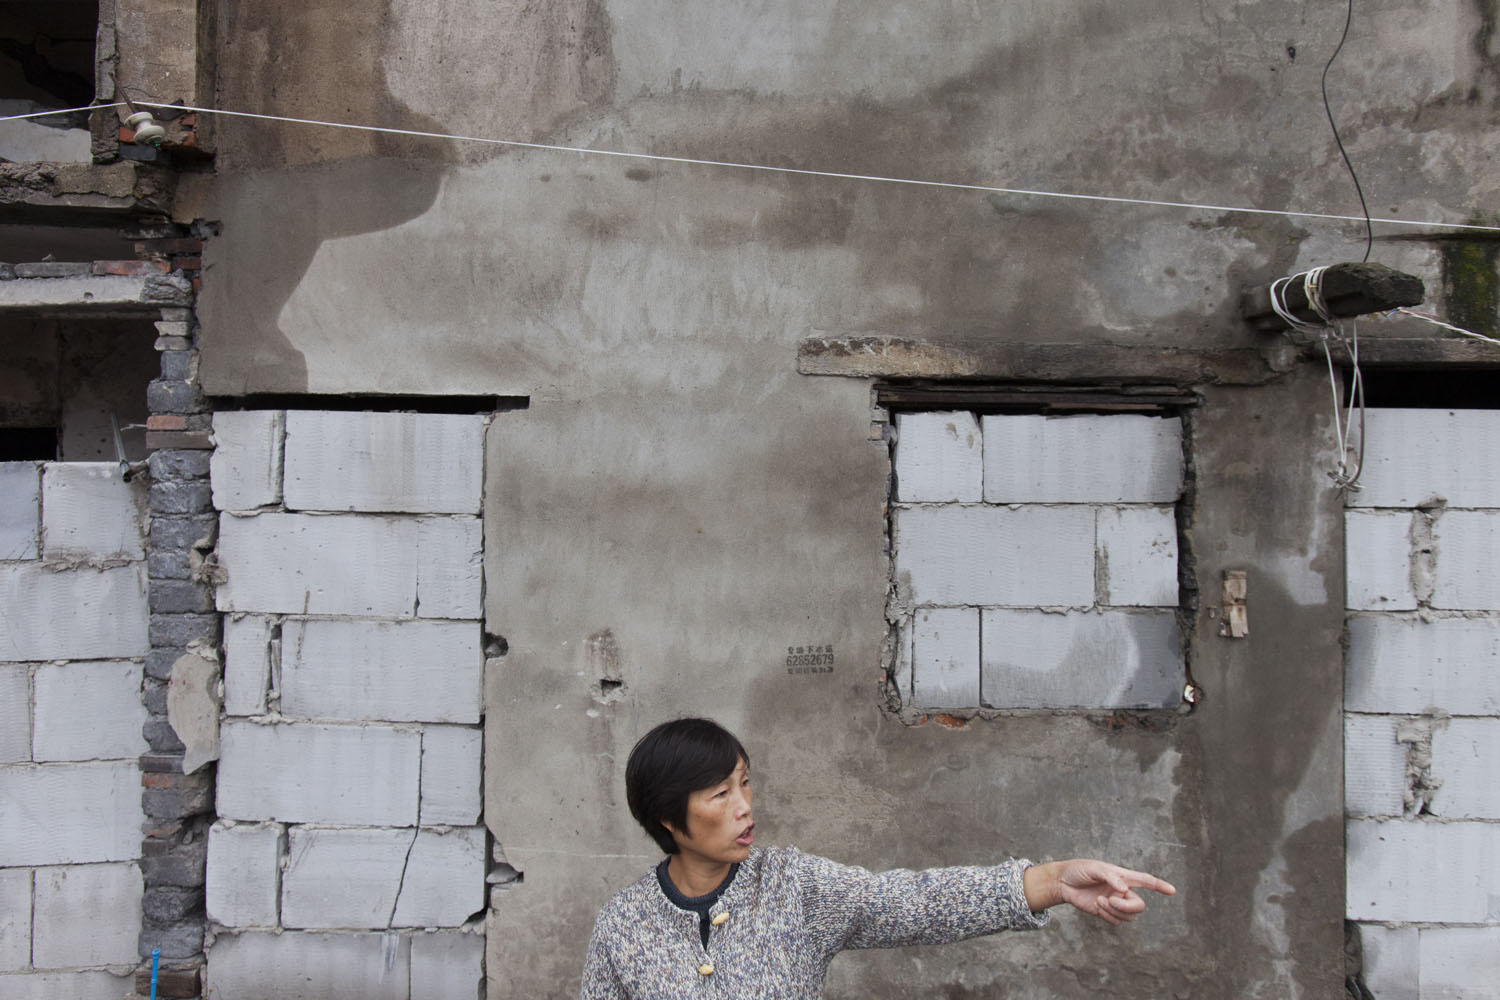   A woman talks to her neighbors in front of condemned property. Guangfu Road. Shanghai, China. 2015.